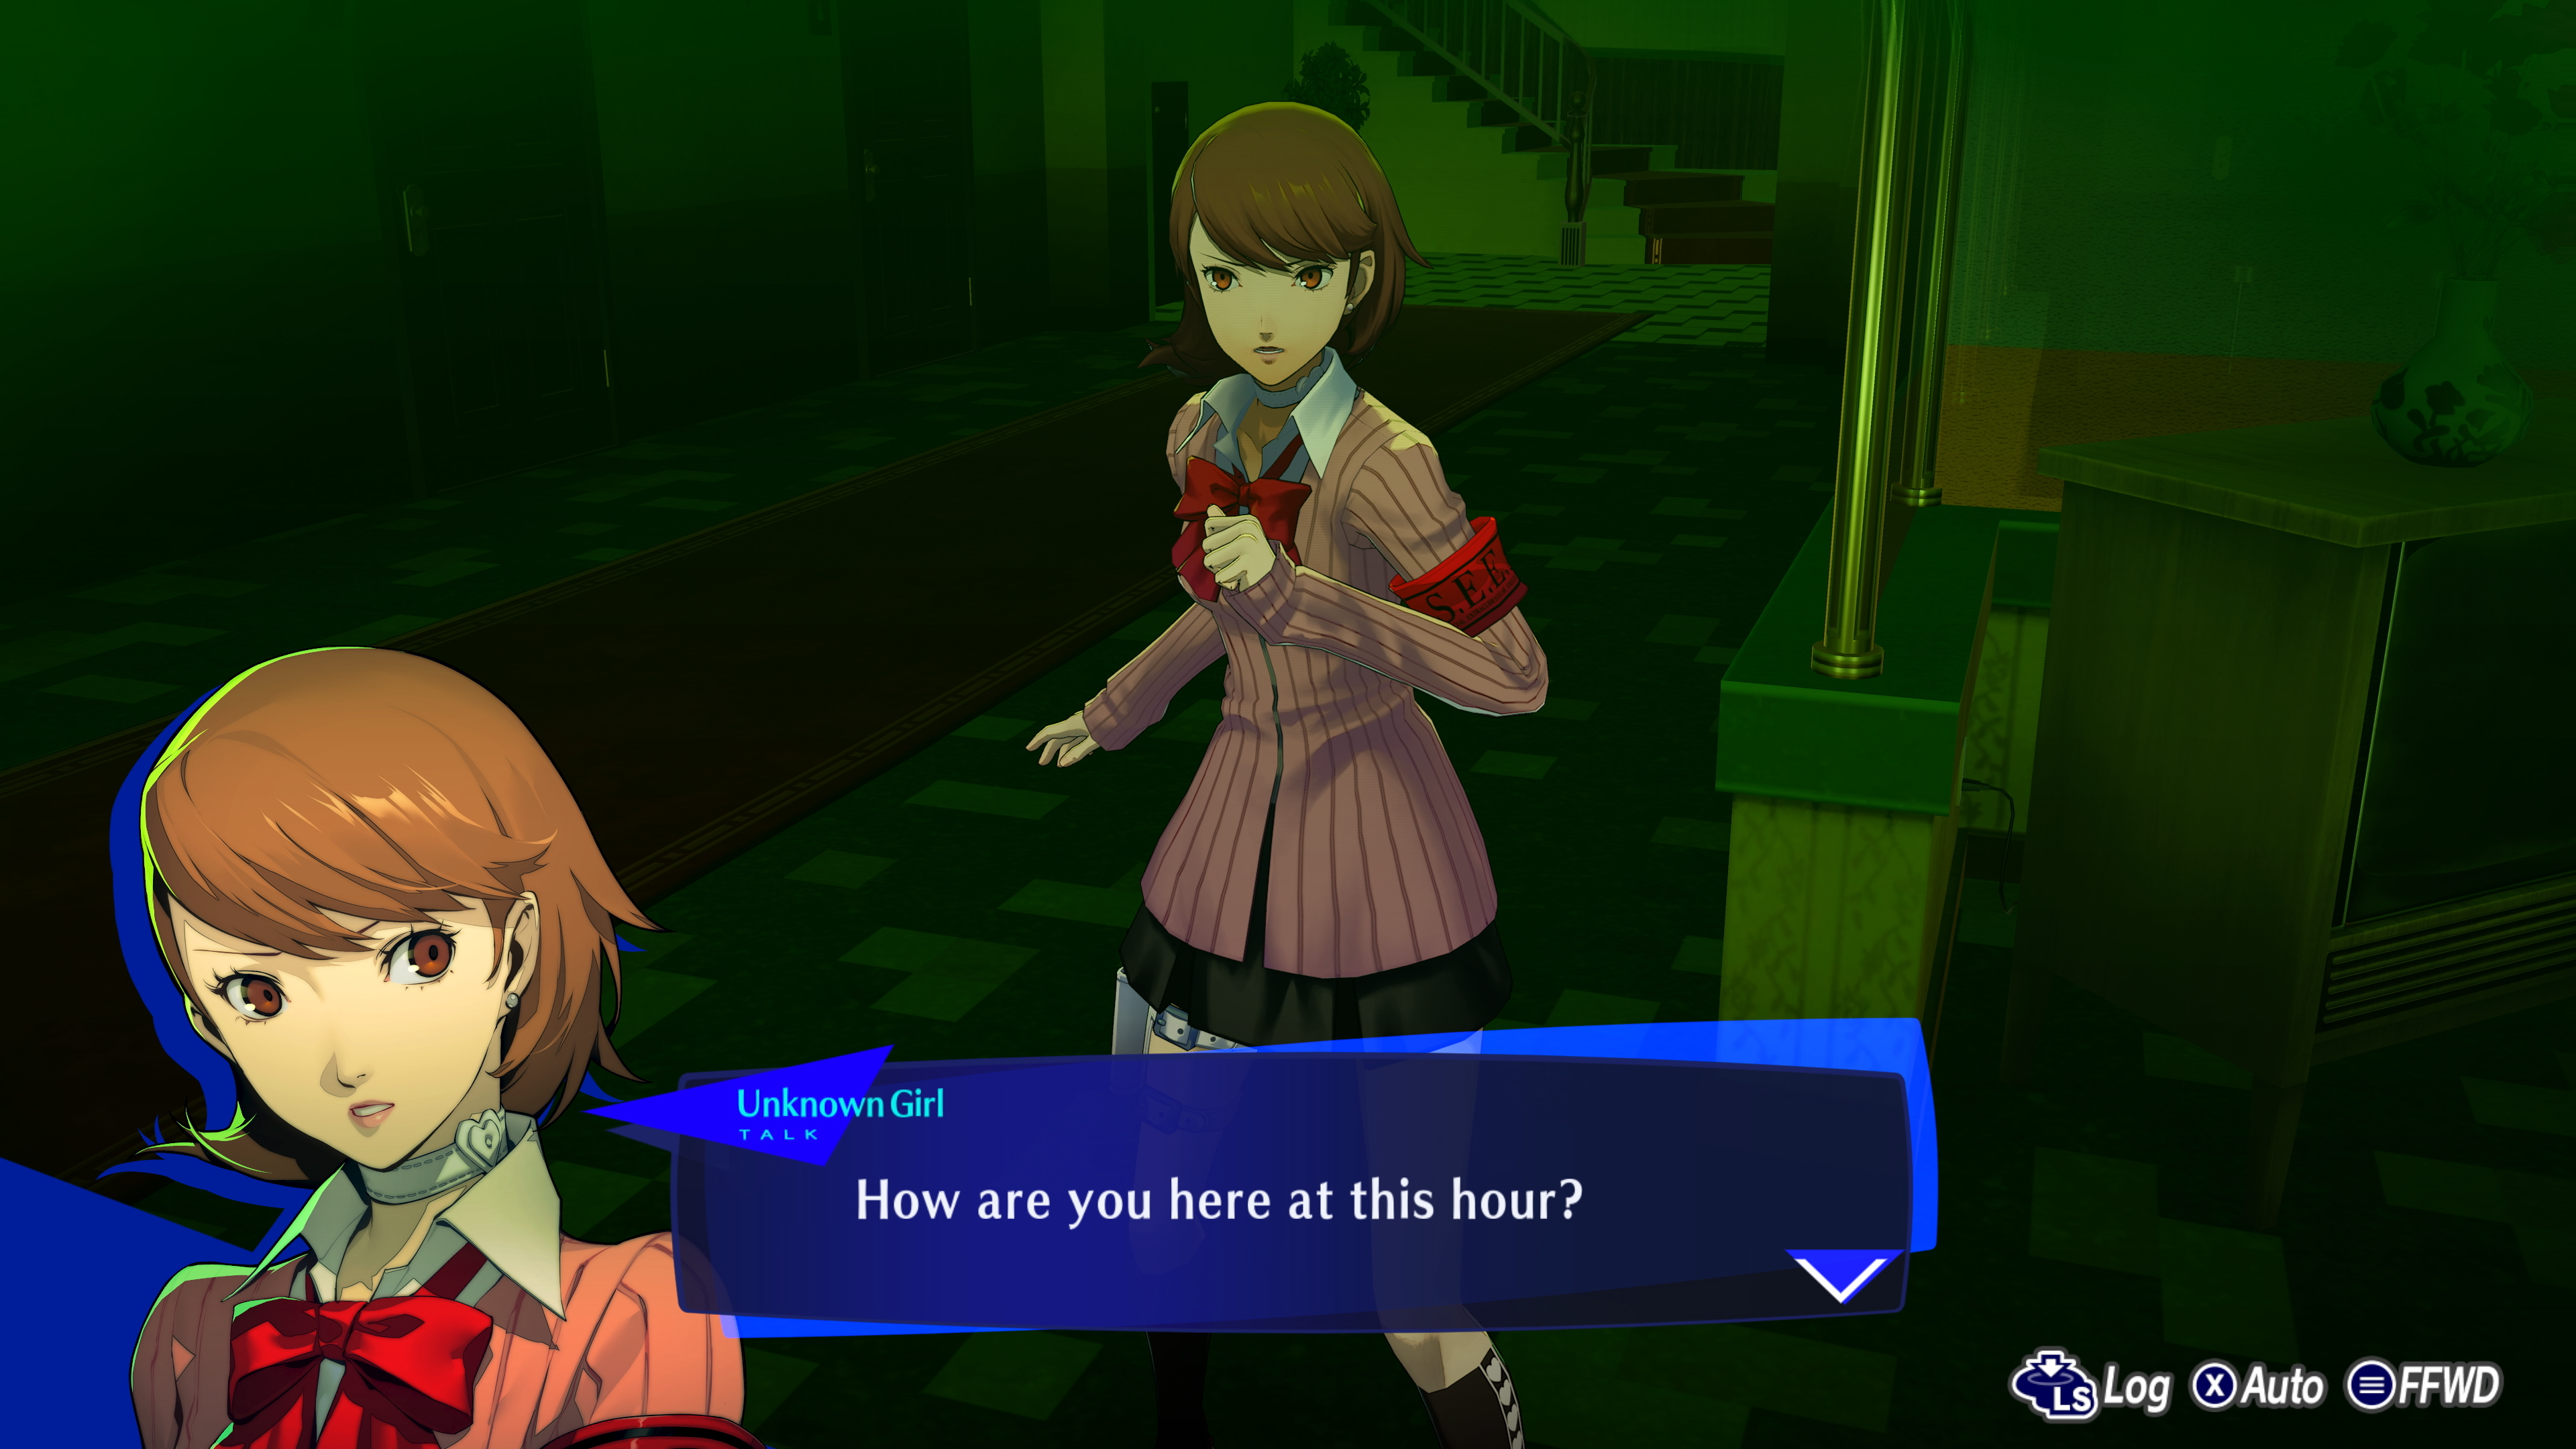 Persona 3 Reload Players Will Have A Less Strict Time Maxing All Social  Links Compared To The Original Game - Noisy Pixel